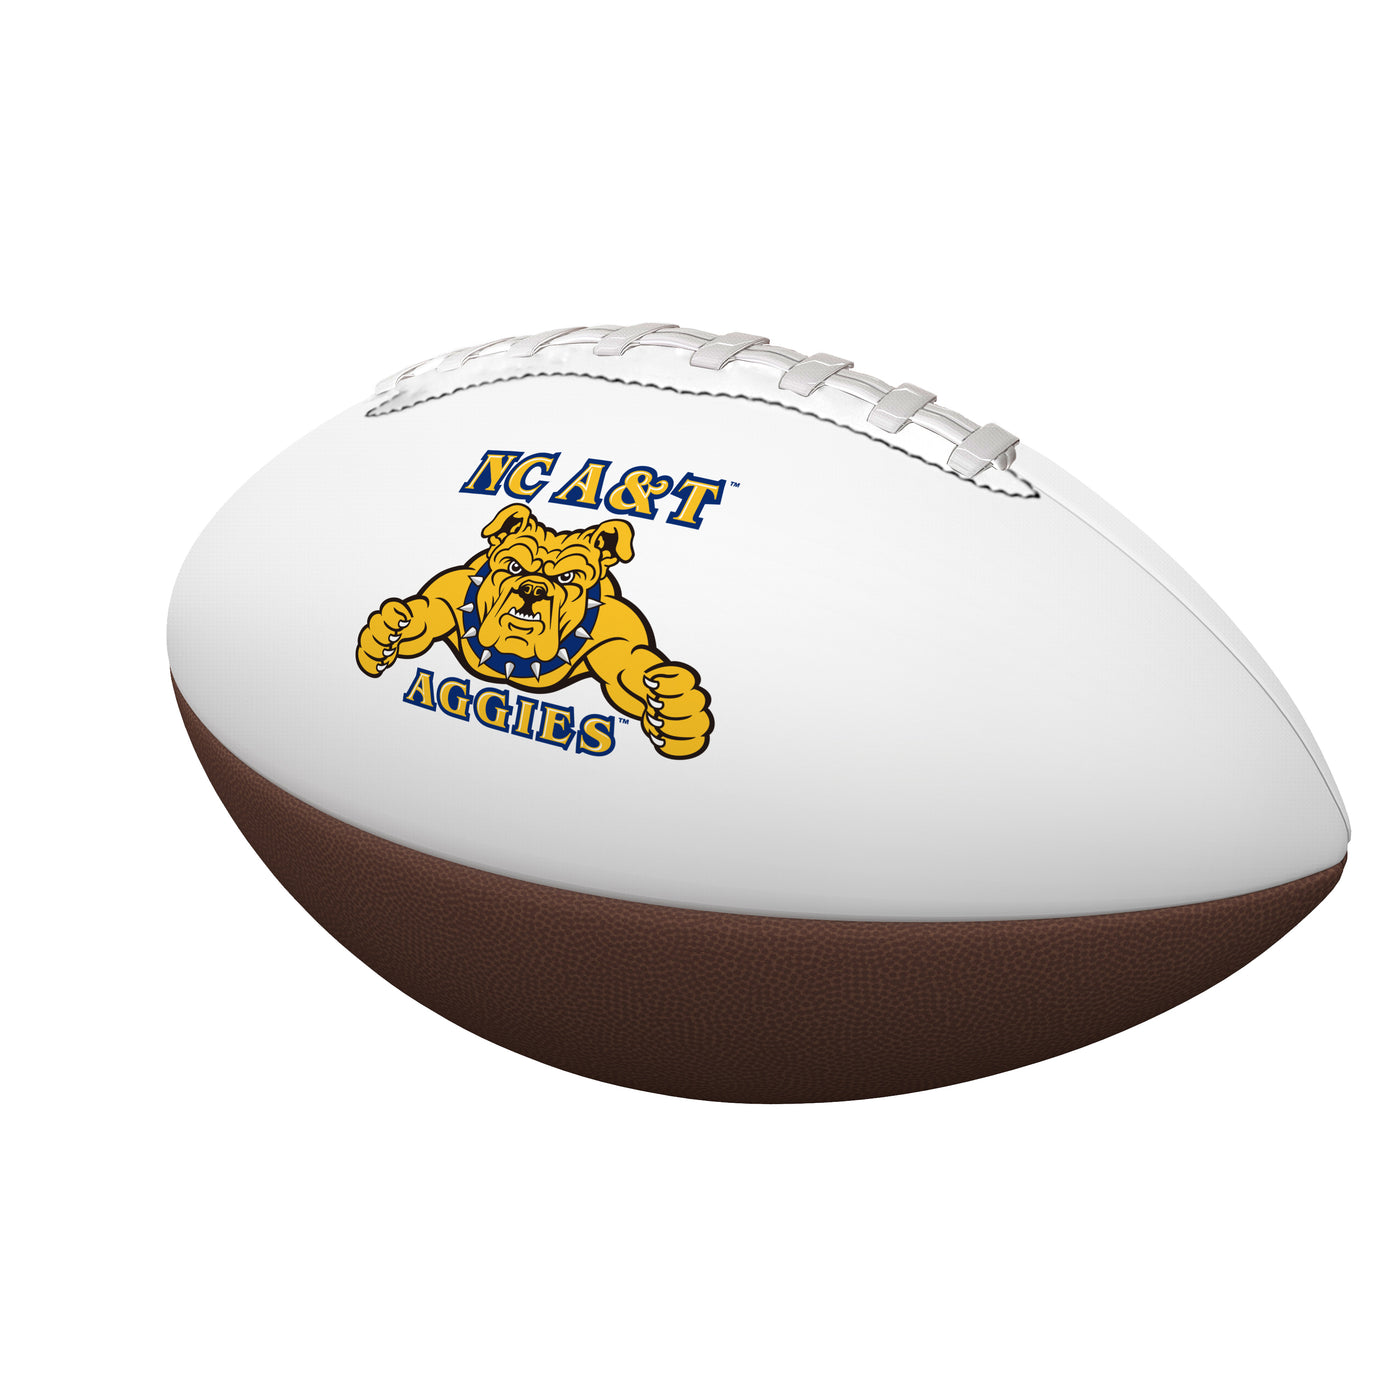 NC A&T Full Size Autograph Football